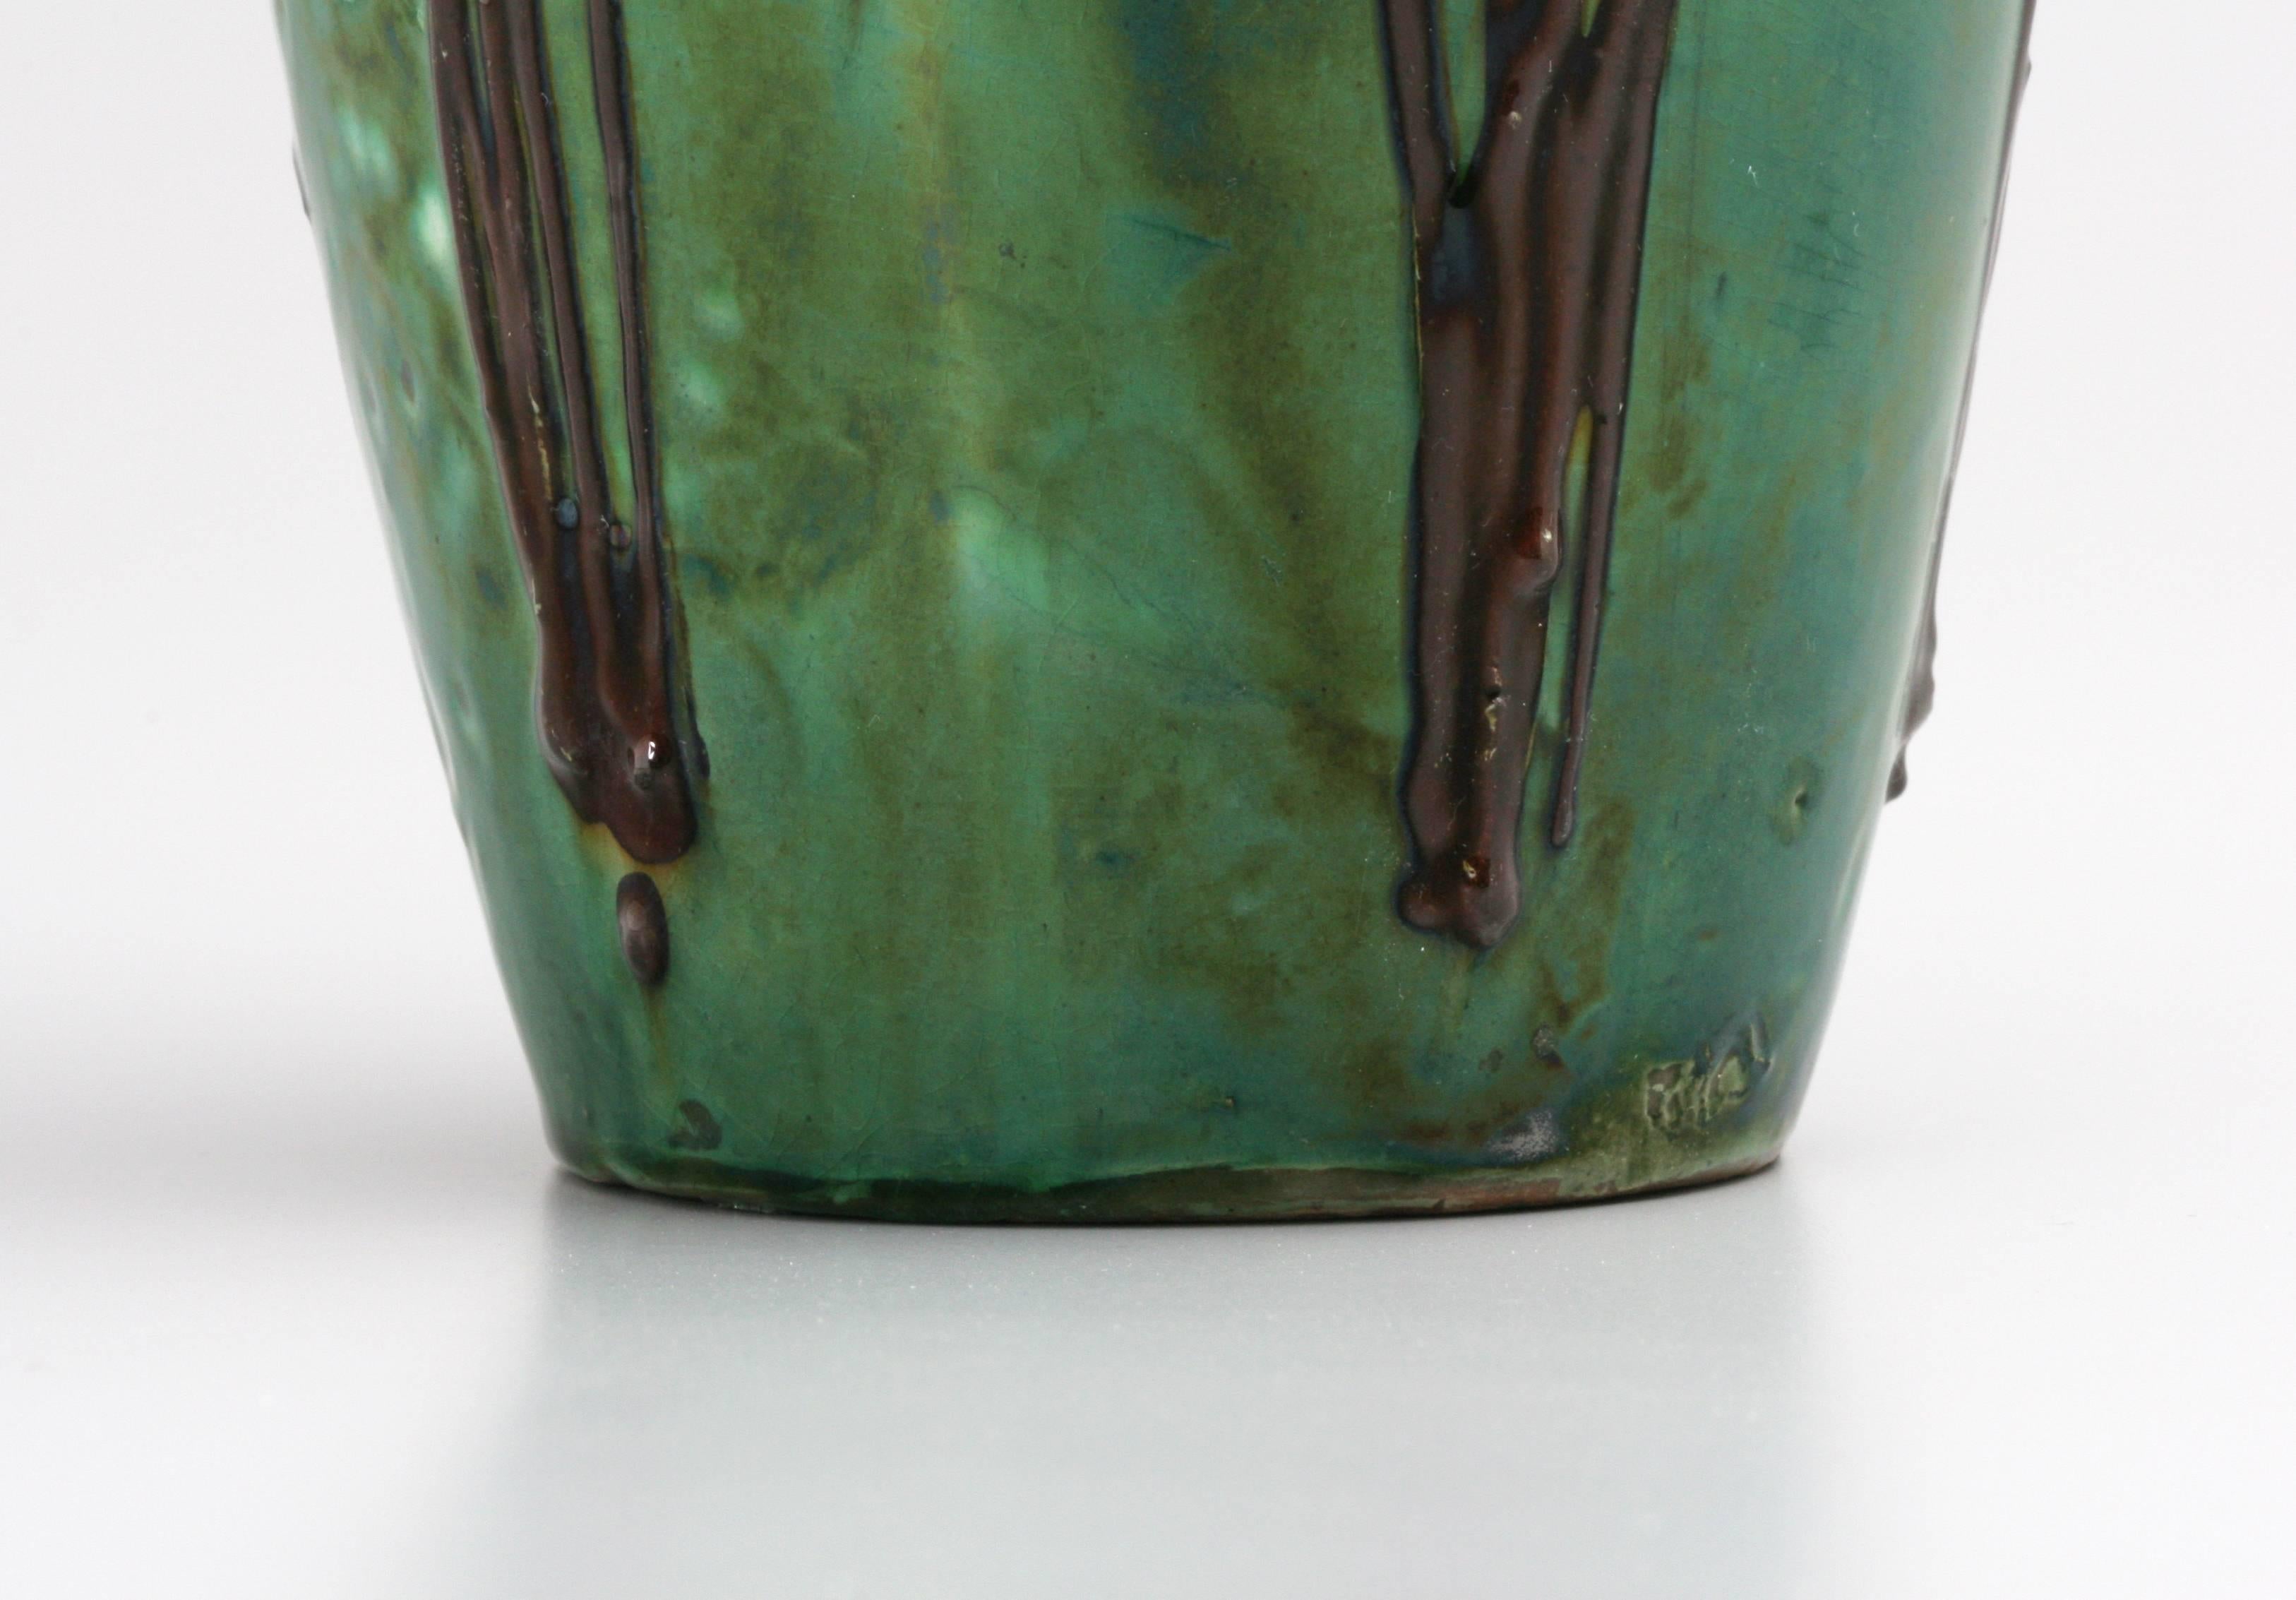 An example of lead-glazed slipware by Max Laeuger, this vibrantly colored vase depicts long-stemmed orange flowers in low relief against a background of bubbly green and inky black. Laeuger was well-known for this style in the 1890s when most of his